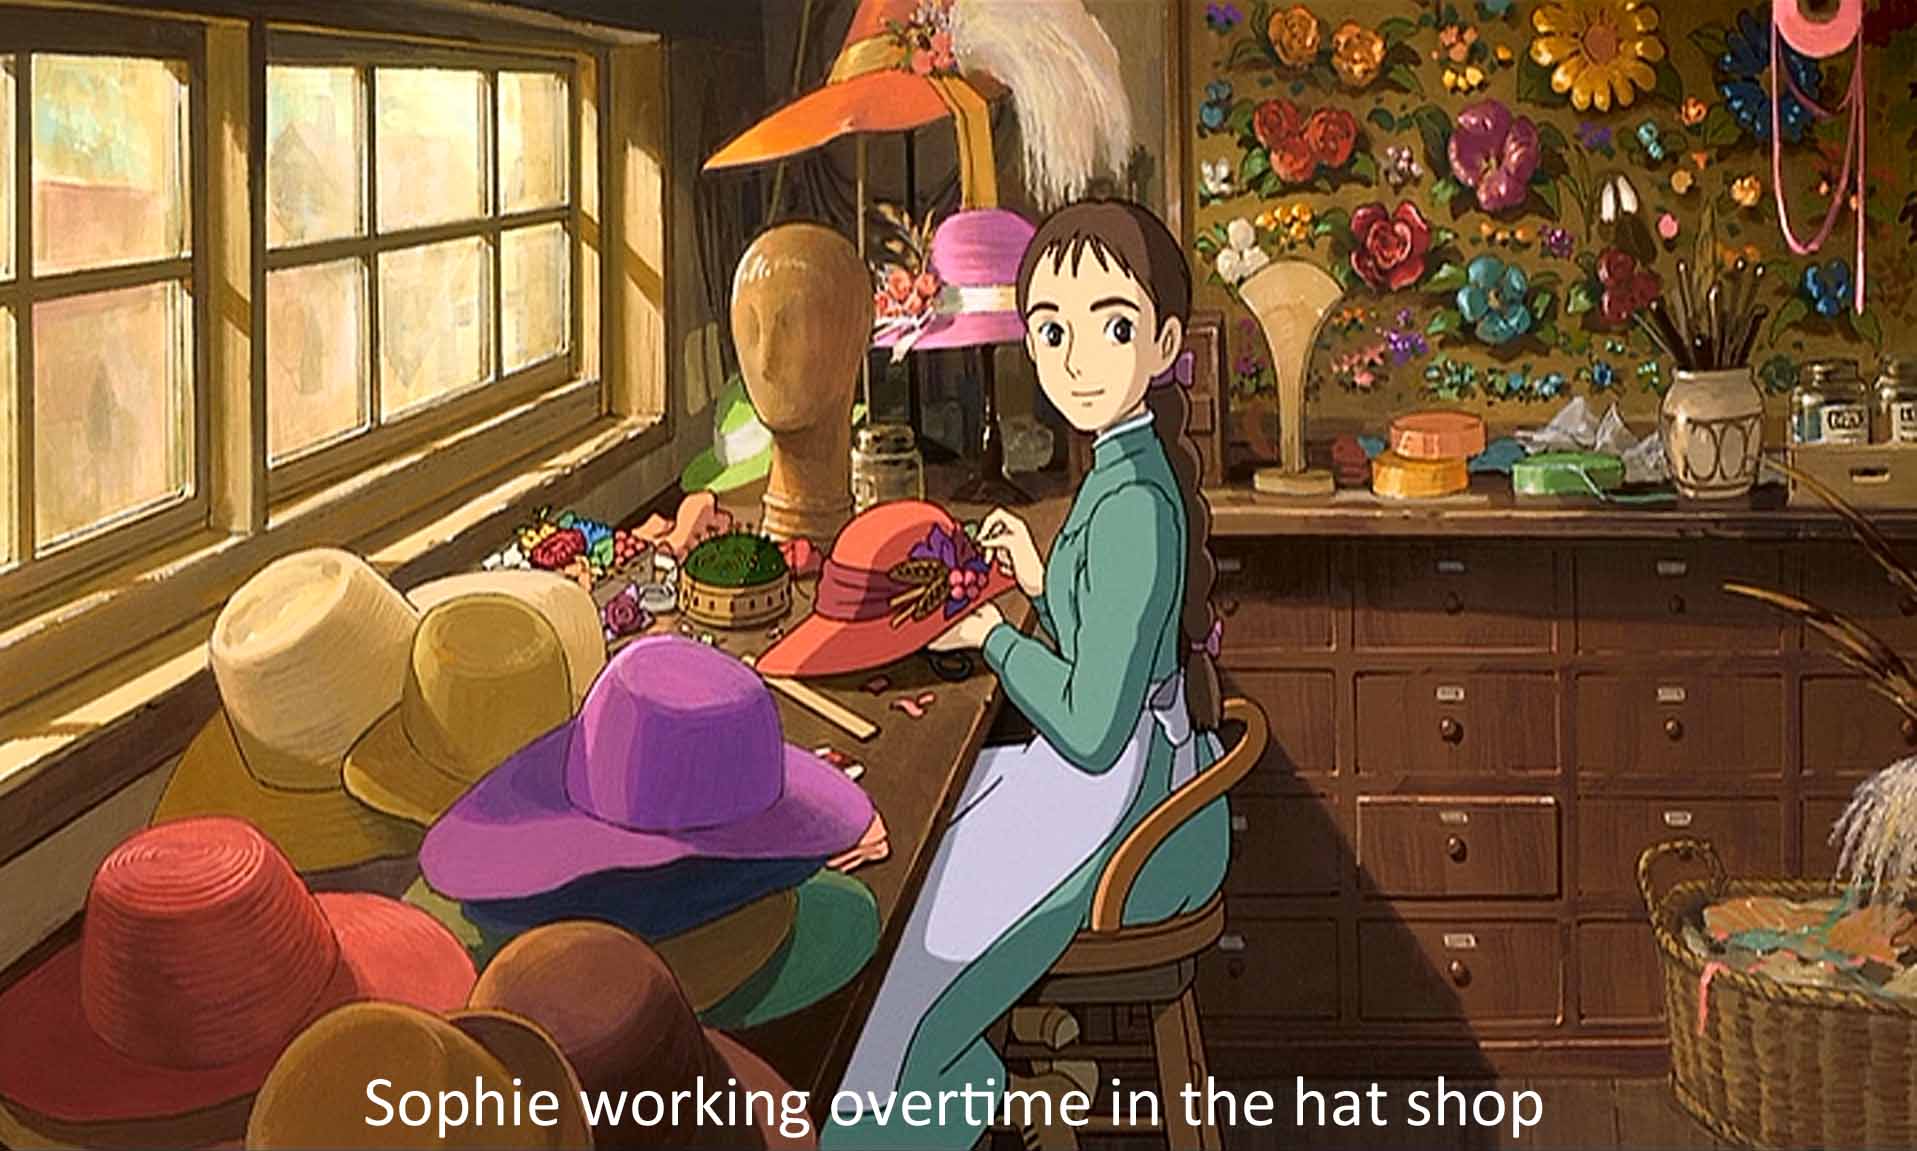 Sophie in the hat shop